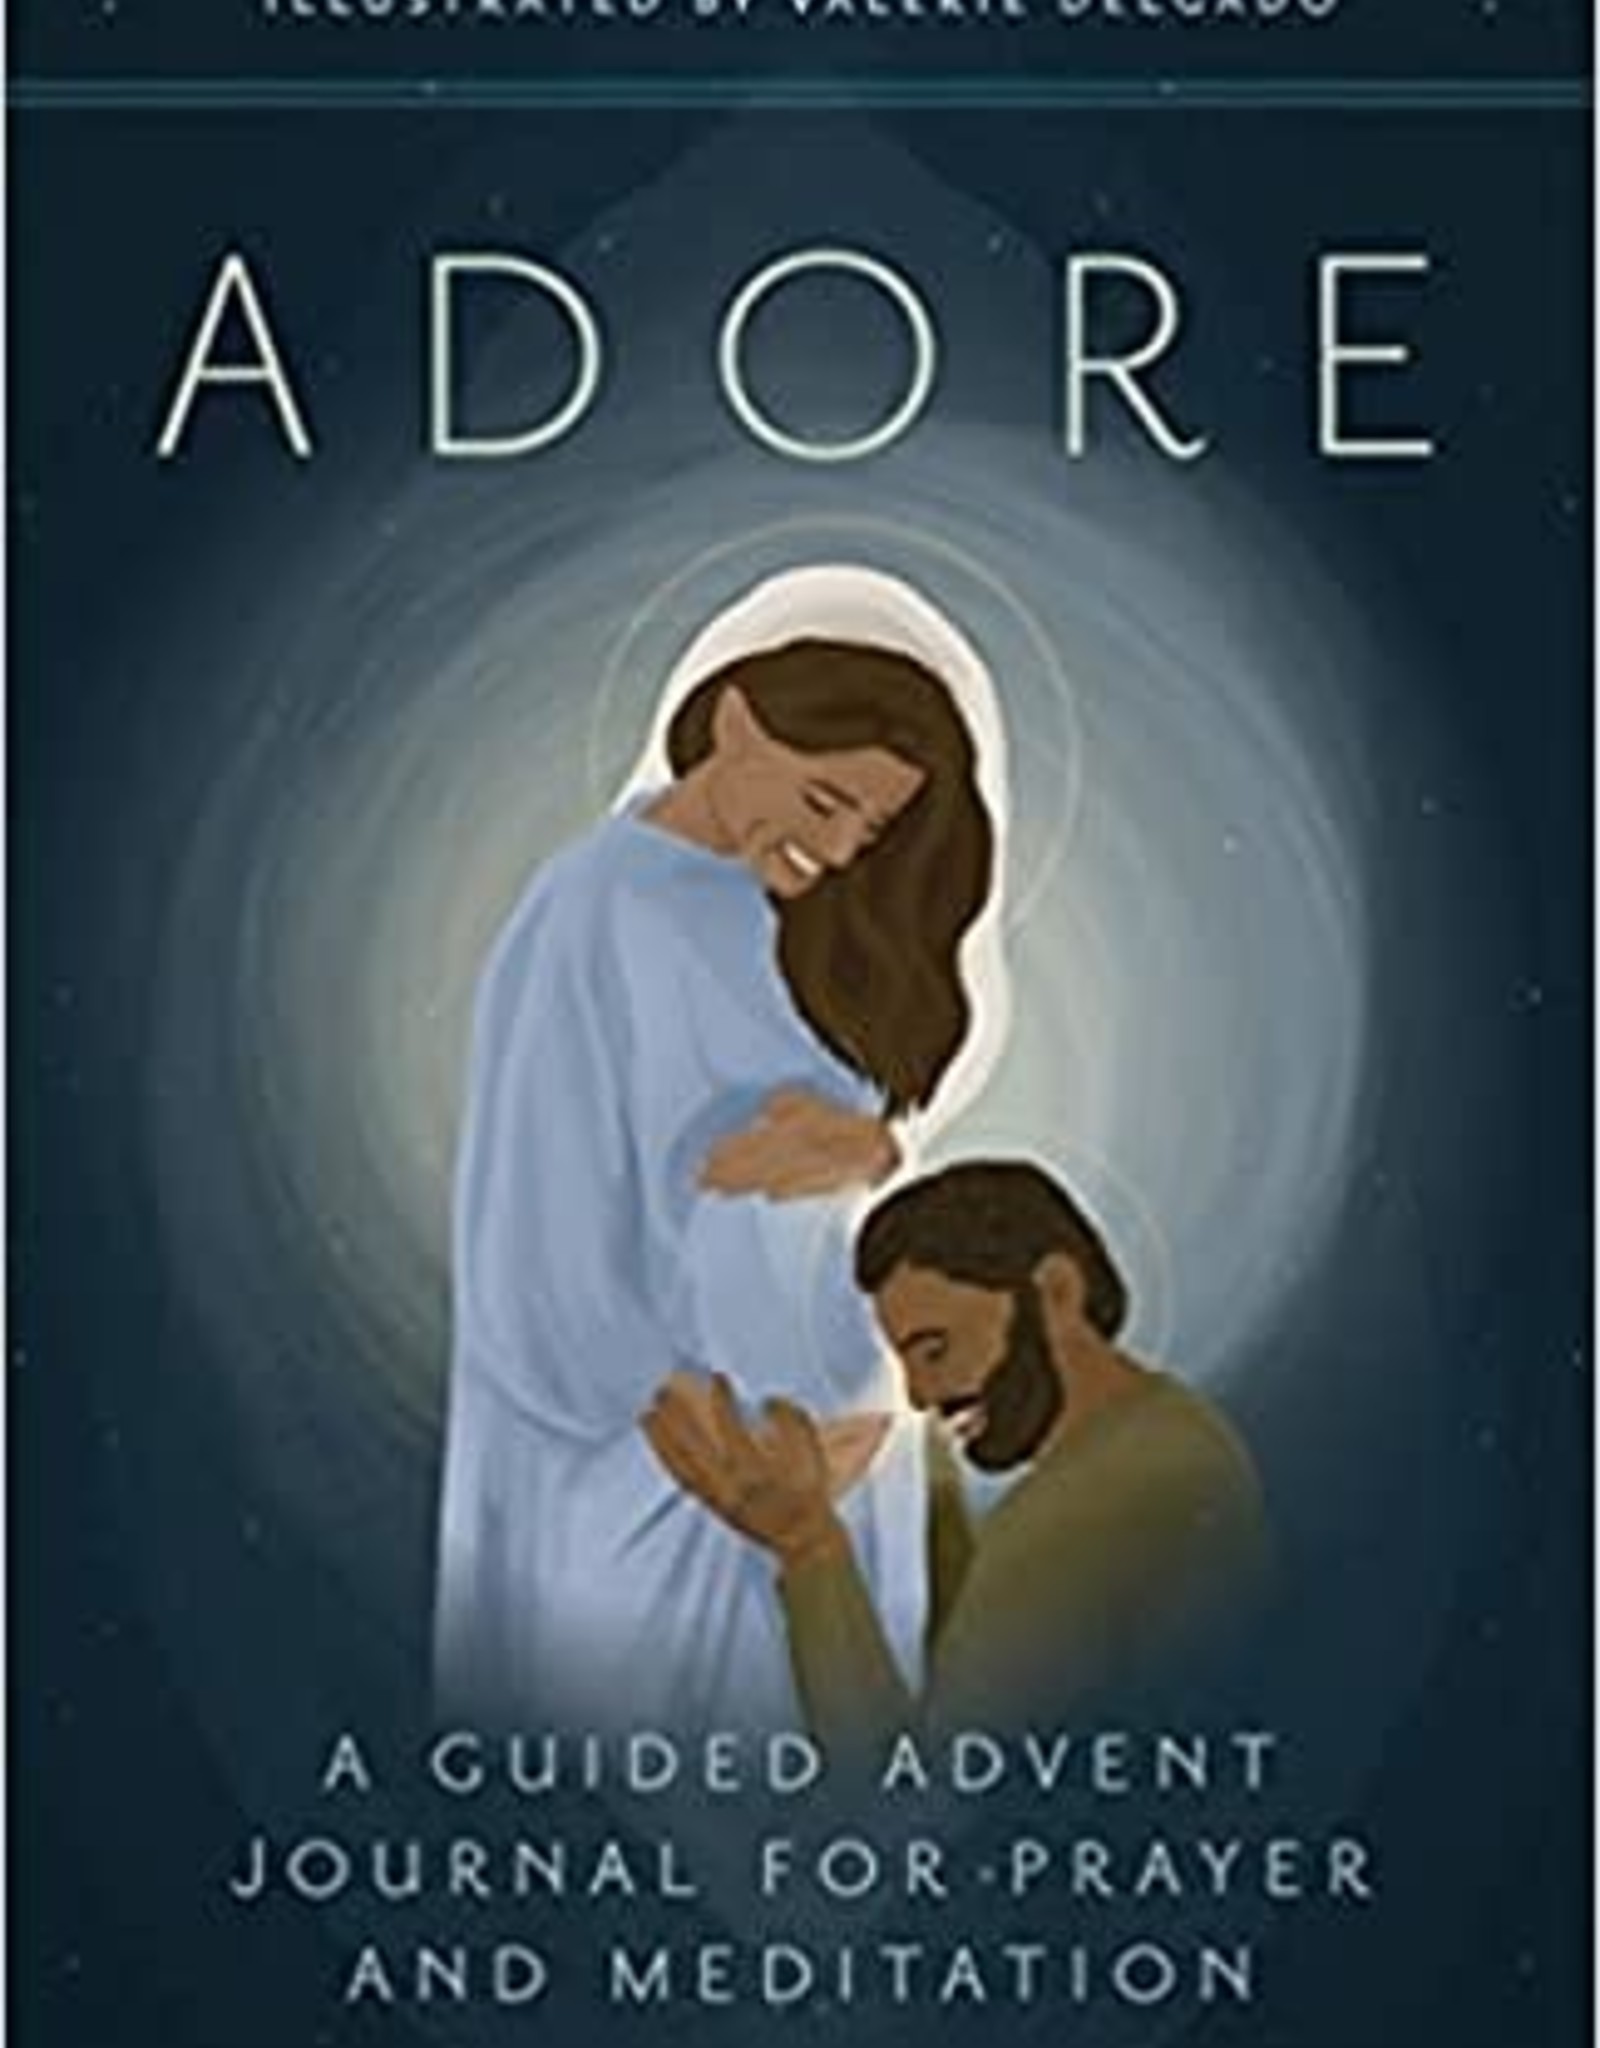 Adore: A Guided Advent Journal for Prayer and Meditation